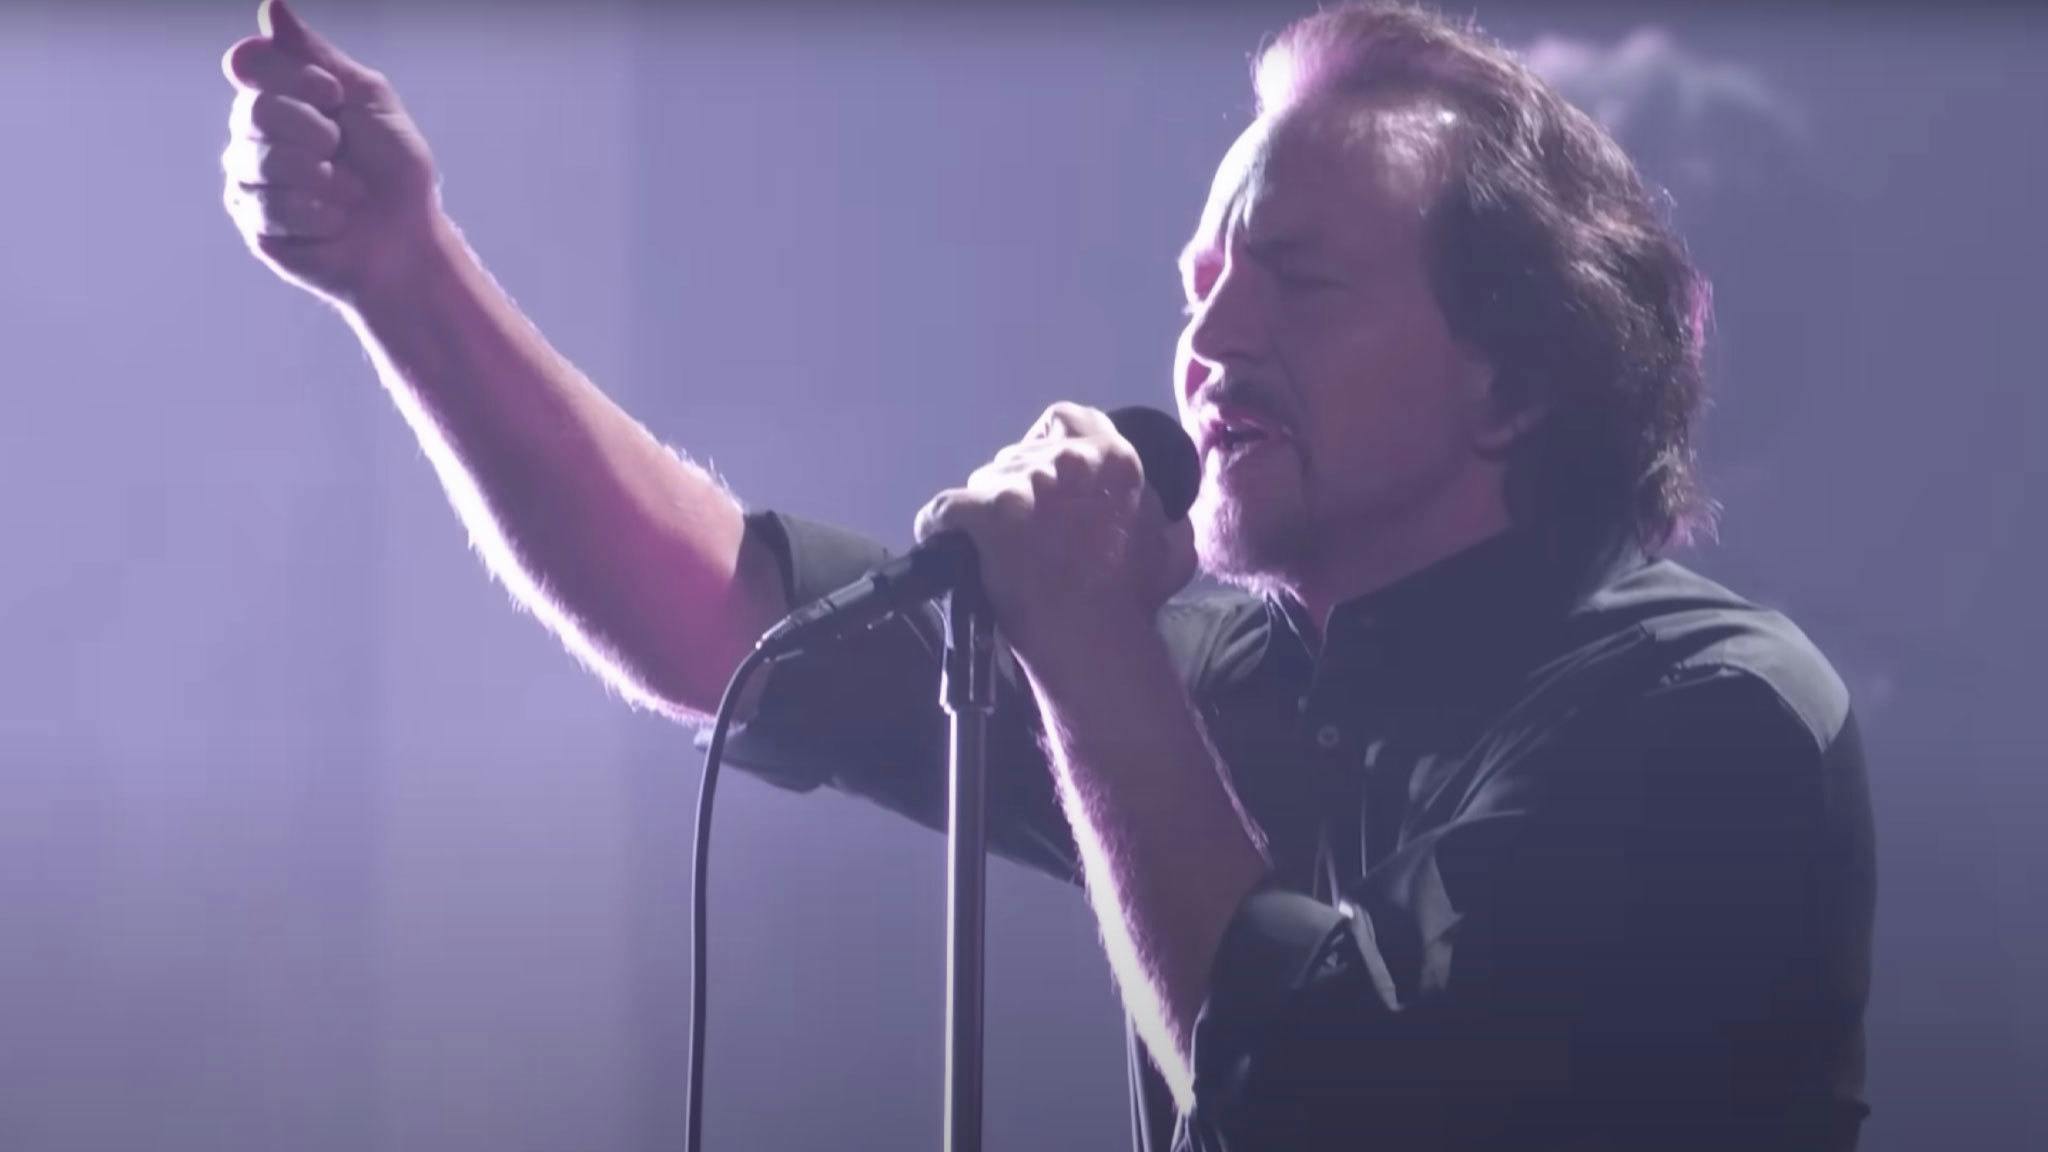 Watch official footage of Eddie Vedder covering U2’s One at the Kennedy Center Honors